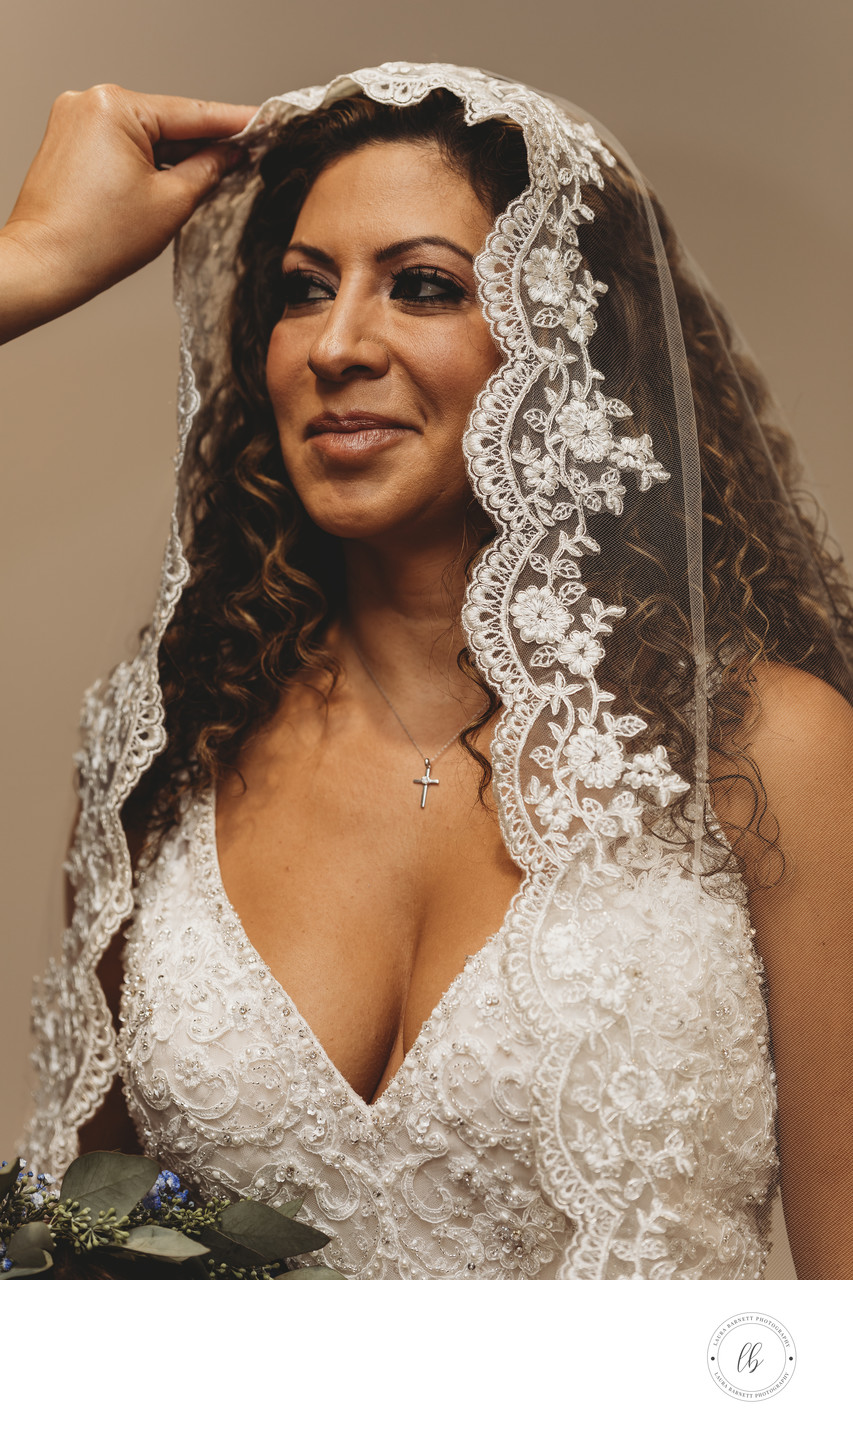 Bride with a veil over her hair